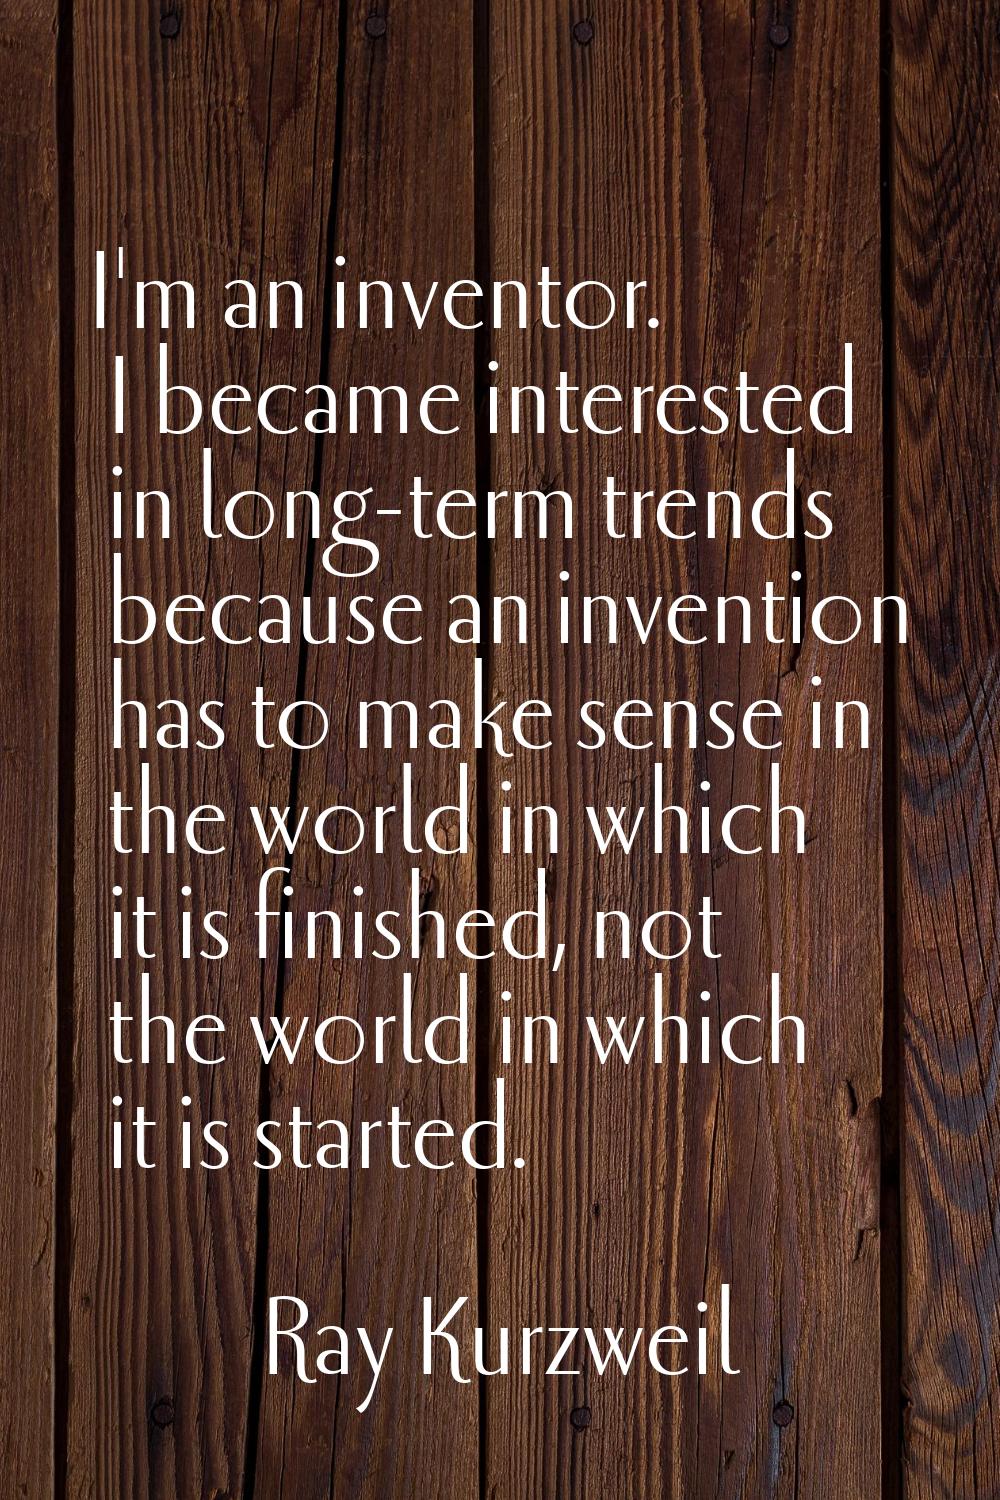 I'm an inventor. I became interested in long-term trends because an invention has to make sense in 